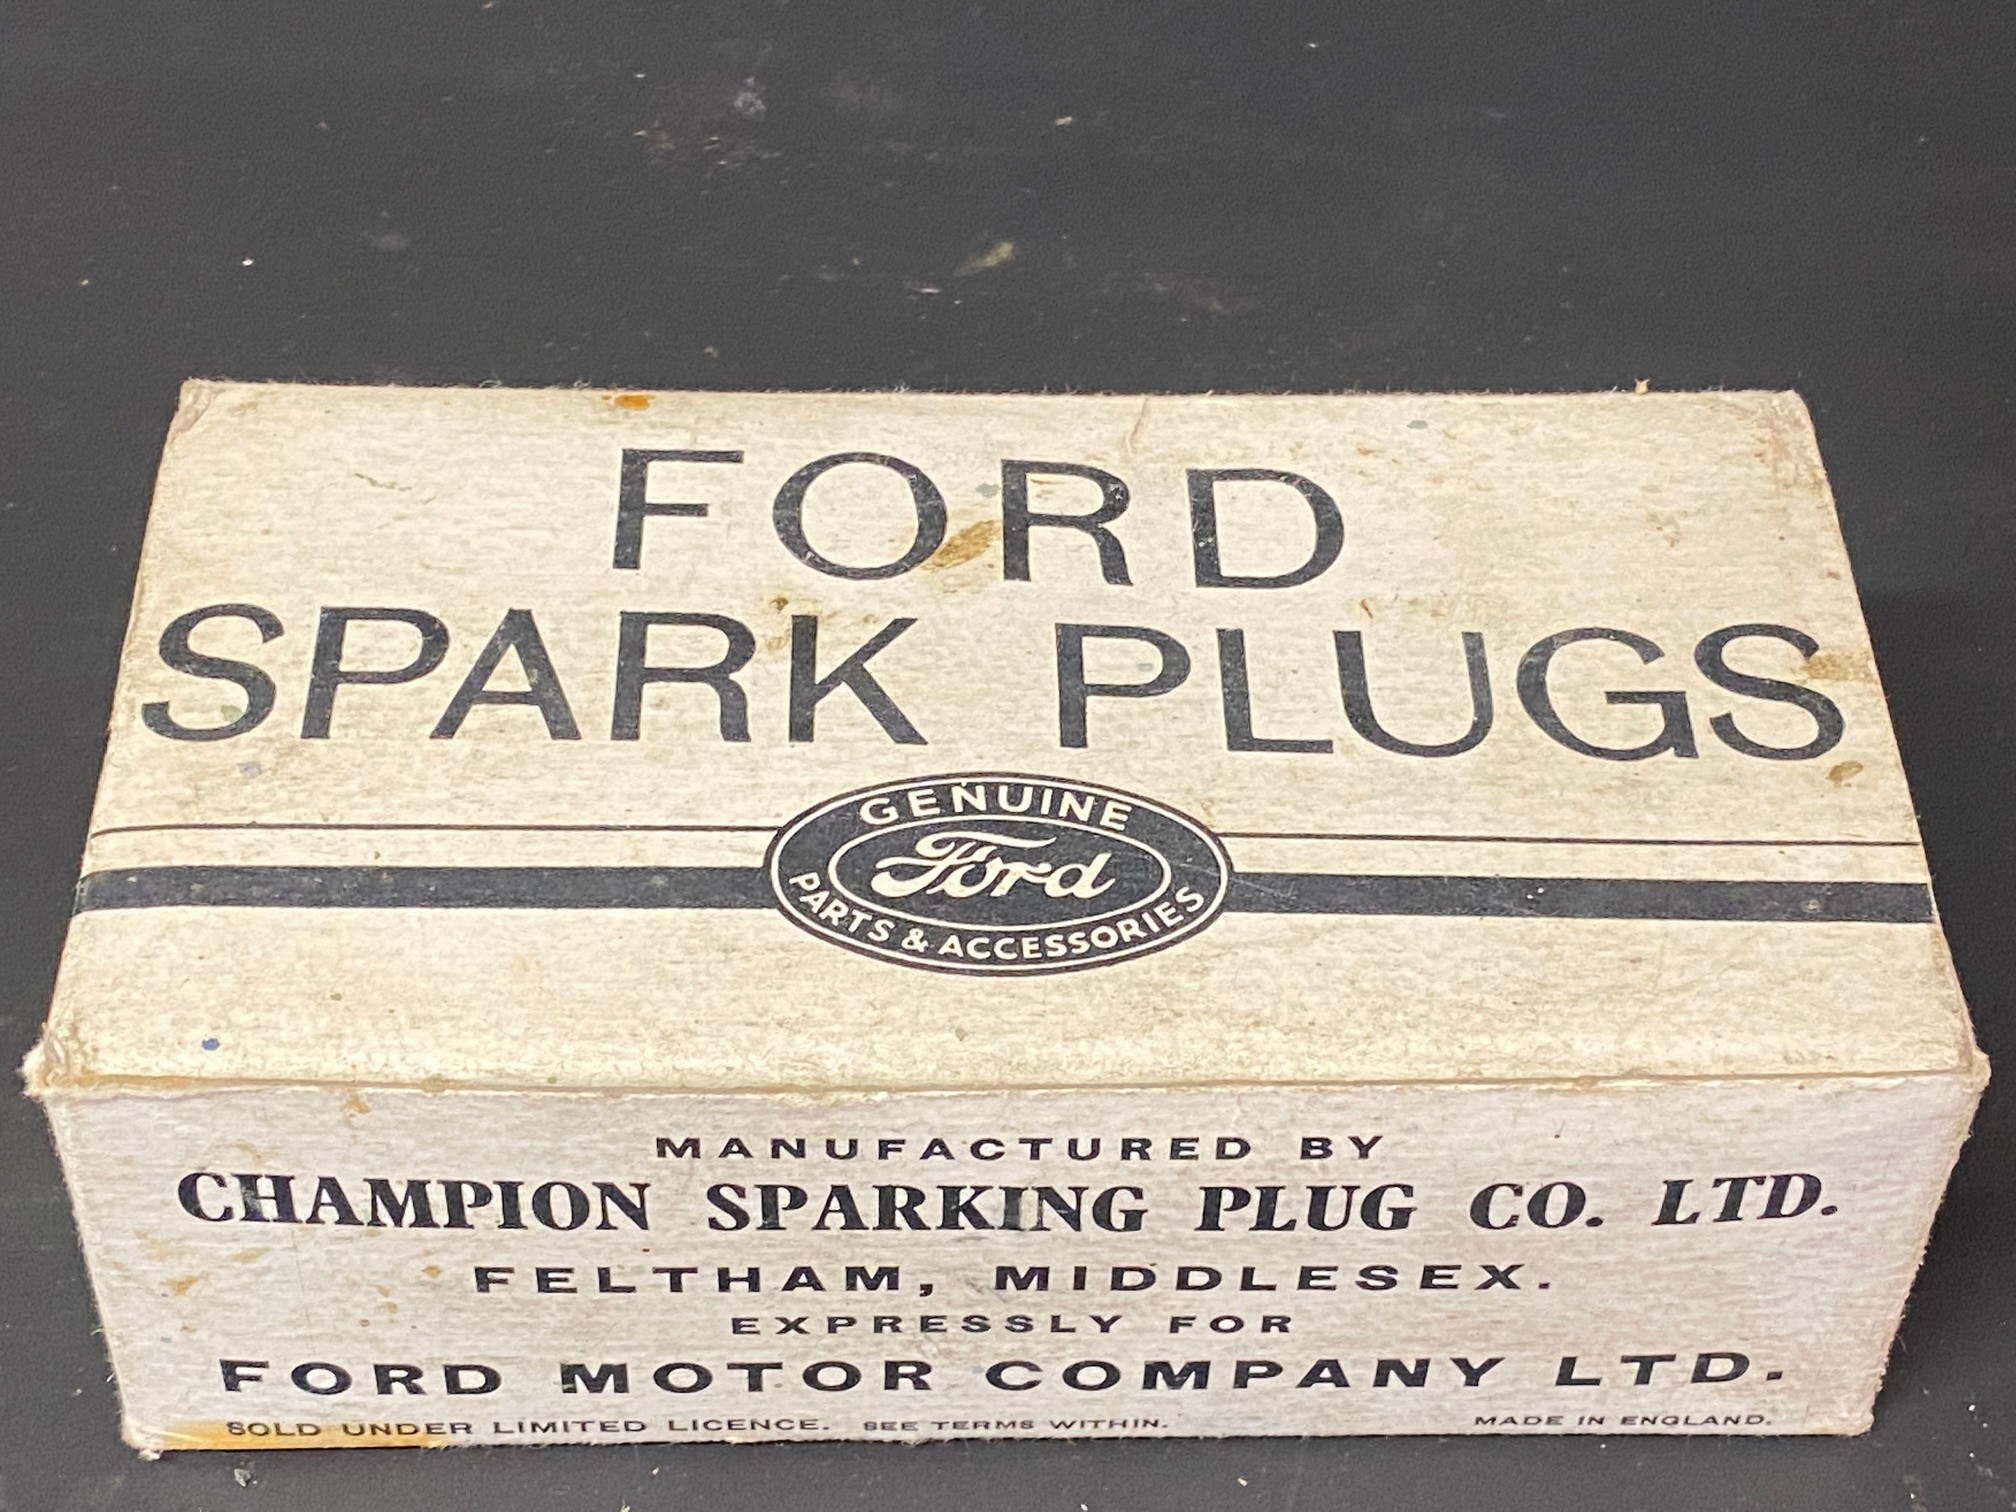 A Ford Spark Plugs cardboard box, manufactured by Champion Sparking Plug Co. Ltd expressly for